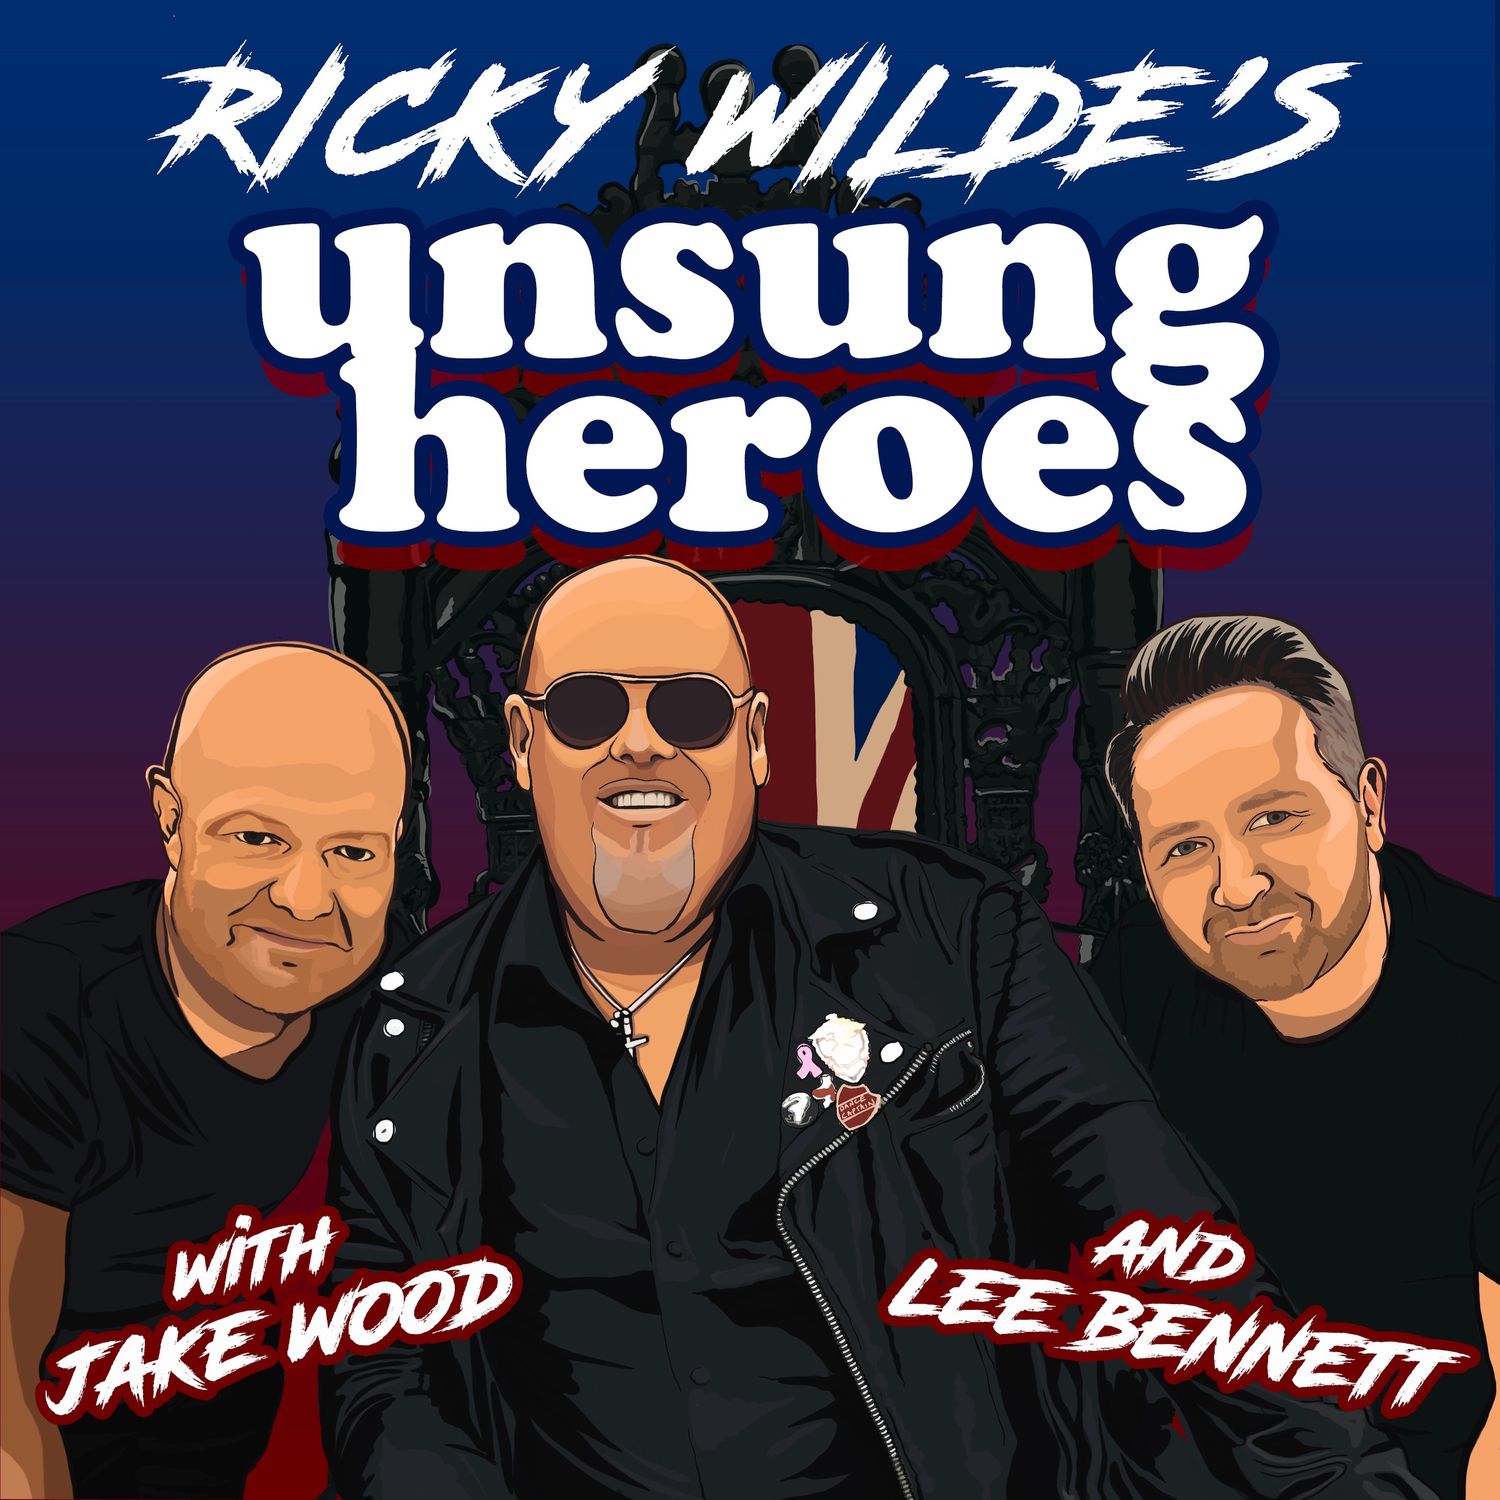 RICKY WILDE'S UNSUNG HEROES WITH JAKE WOOD & LEE BENNETT